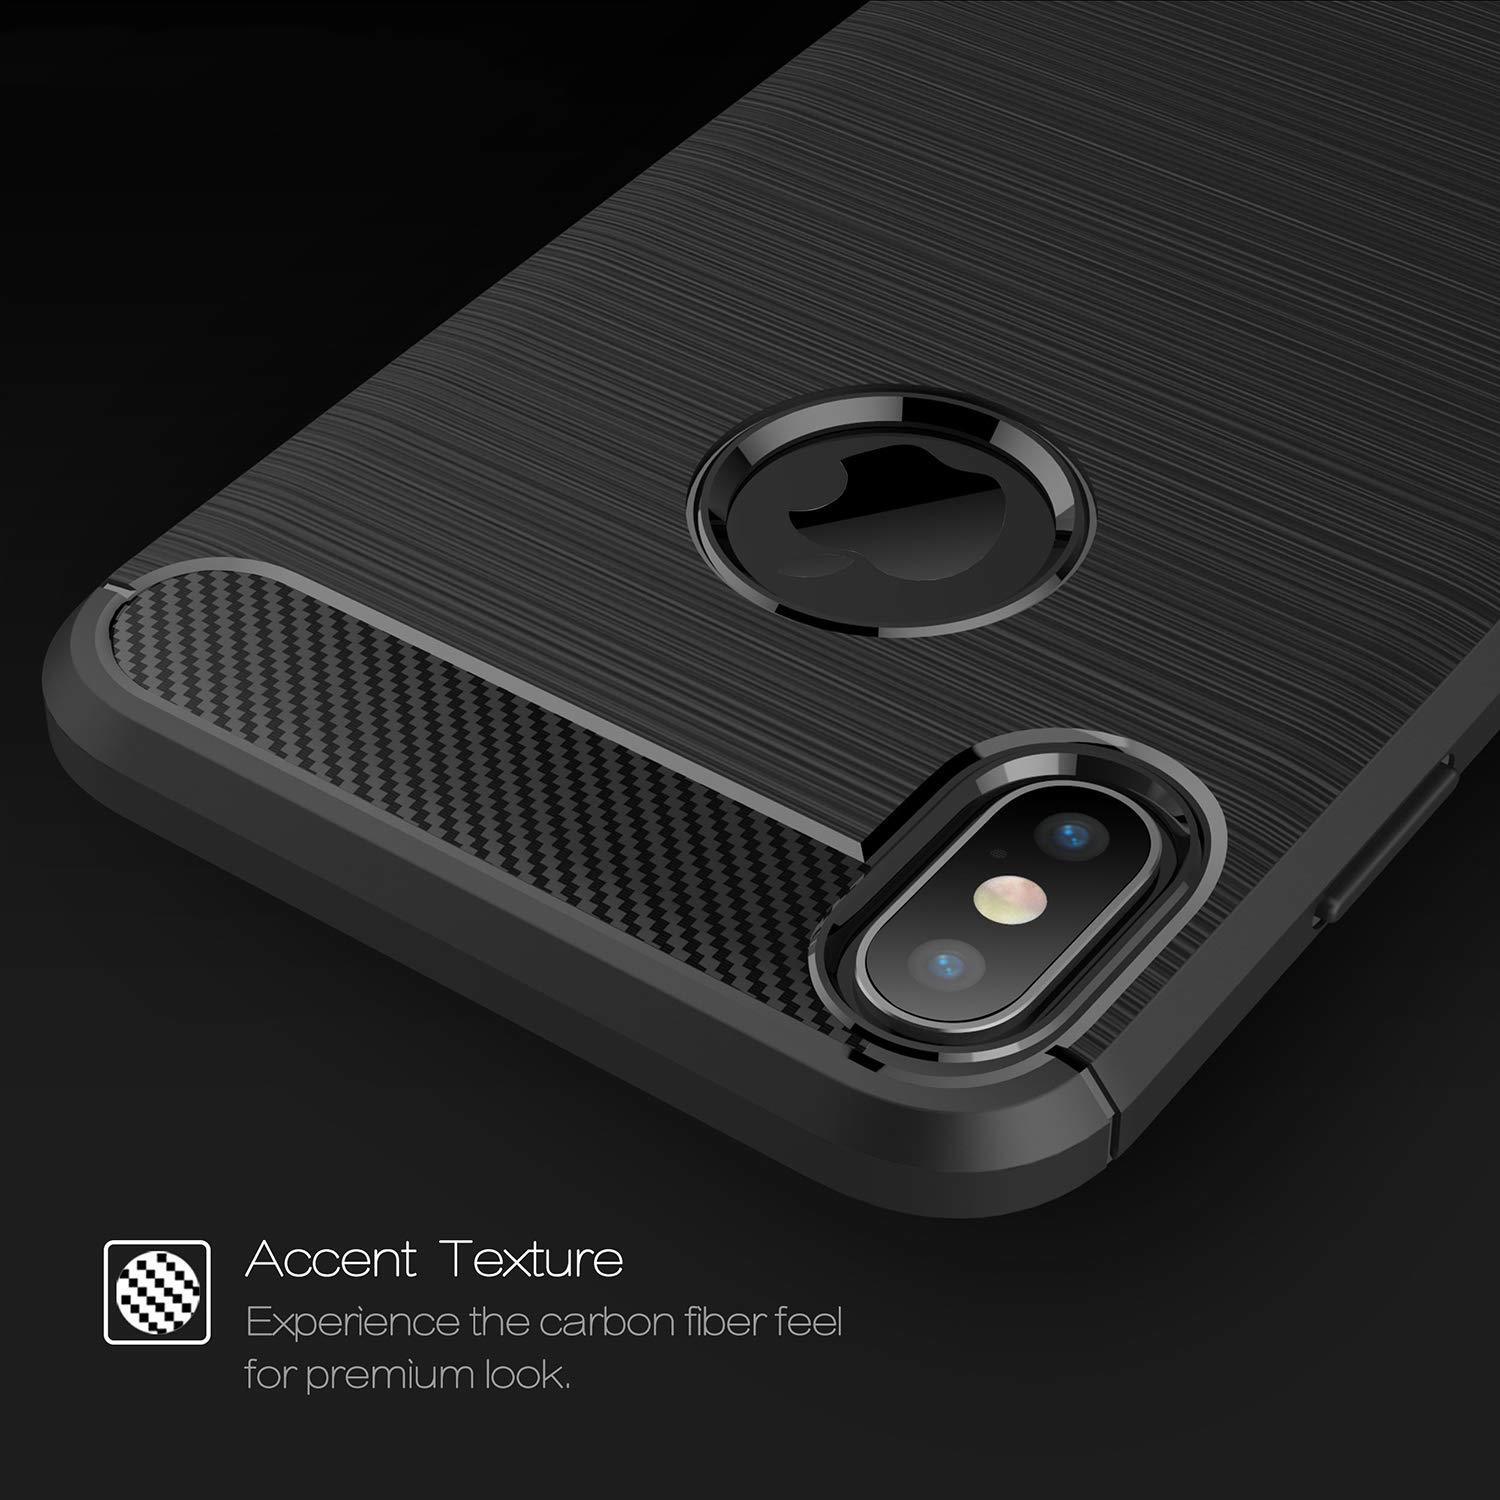 Shockproof Hybrid Carbon Fiber Heavy Duty Case Cover For Apple iPhone XS Max